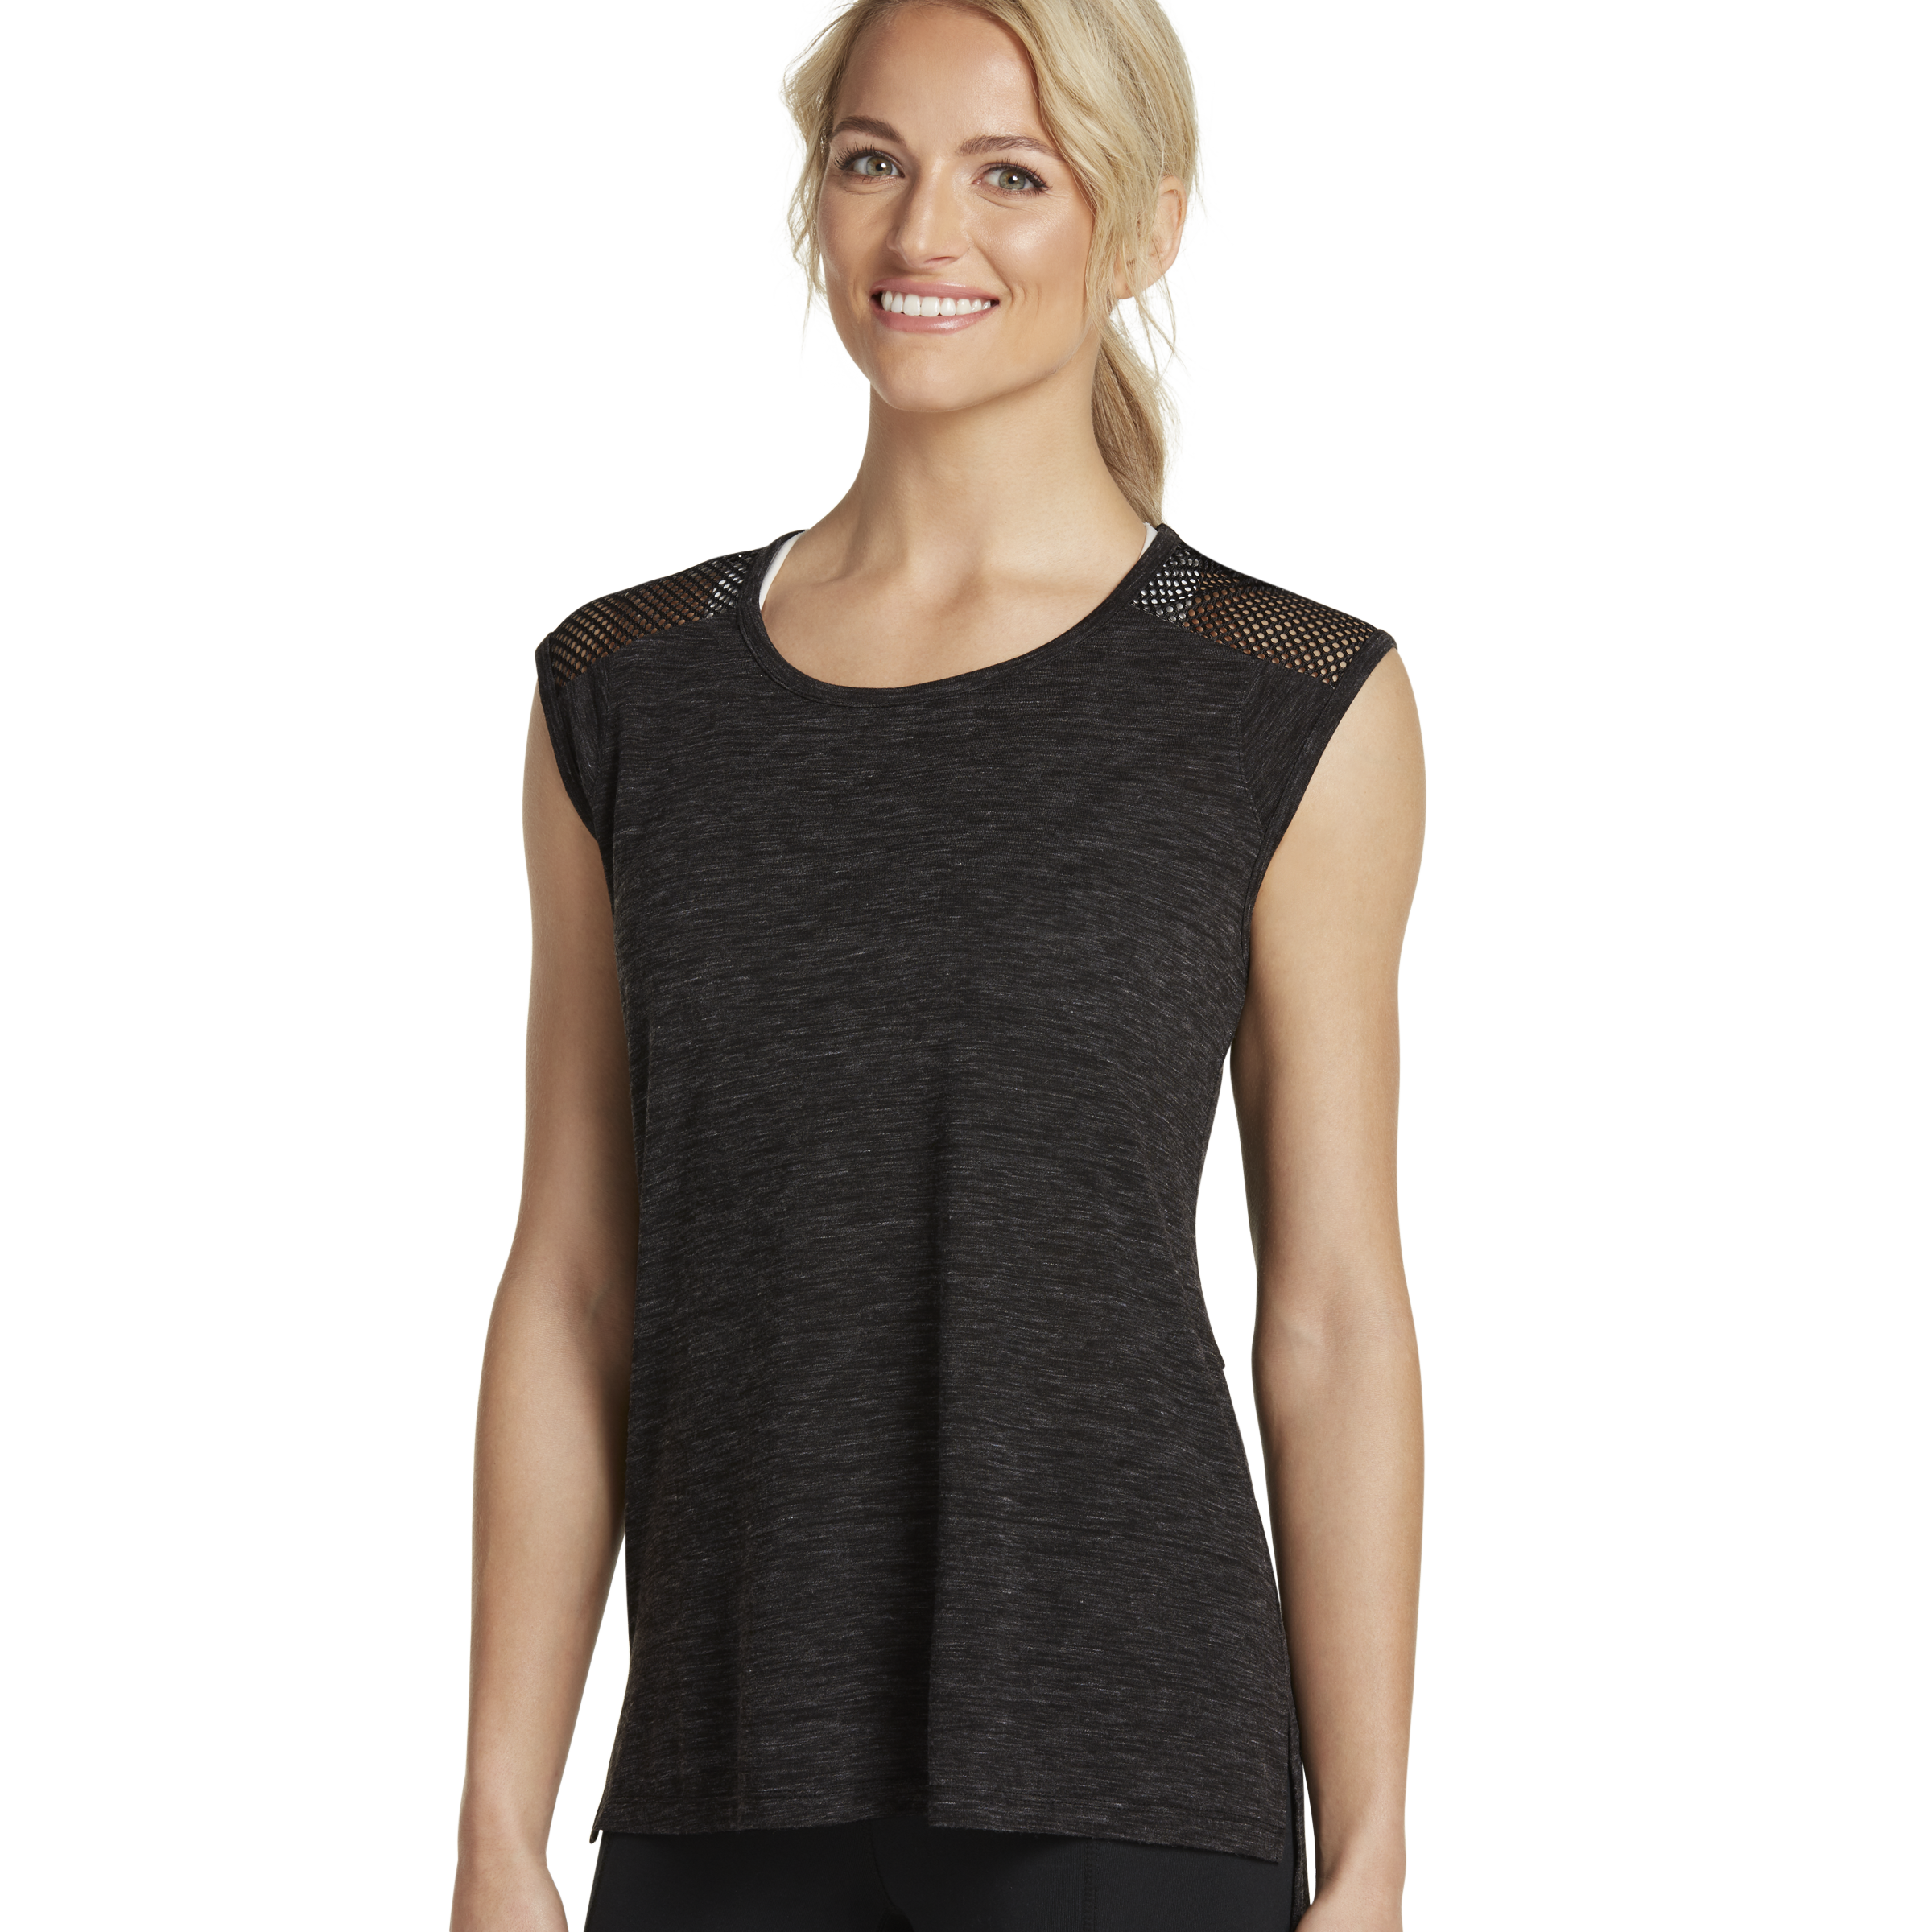 Clothing, Black, Neck, Sleeve, T-shirt, Shoulder, Blouse, Top, Outerwear, Muscle, 